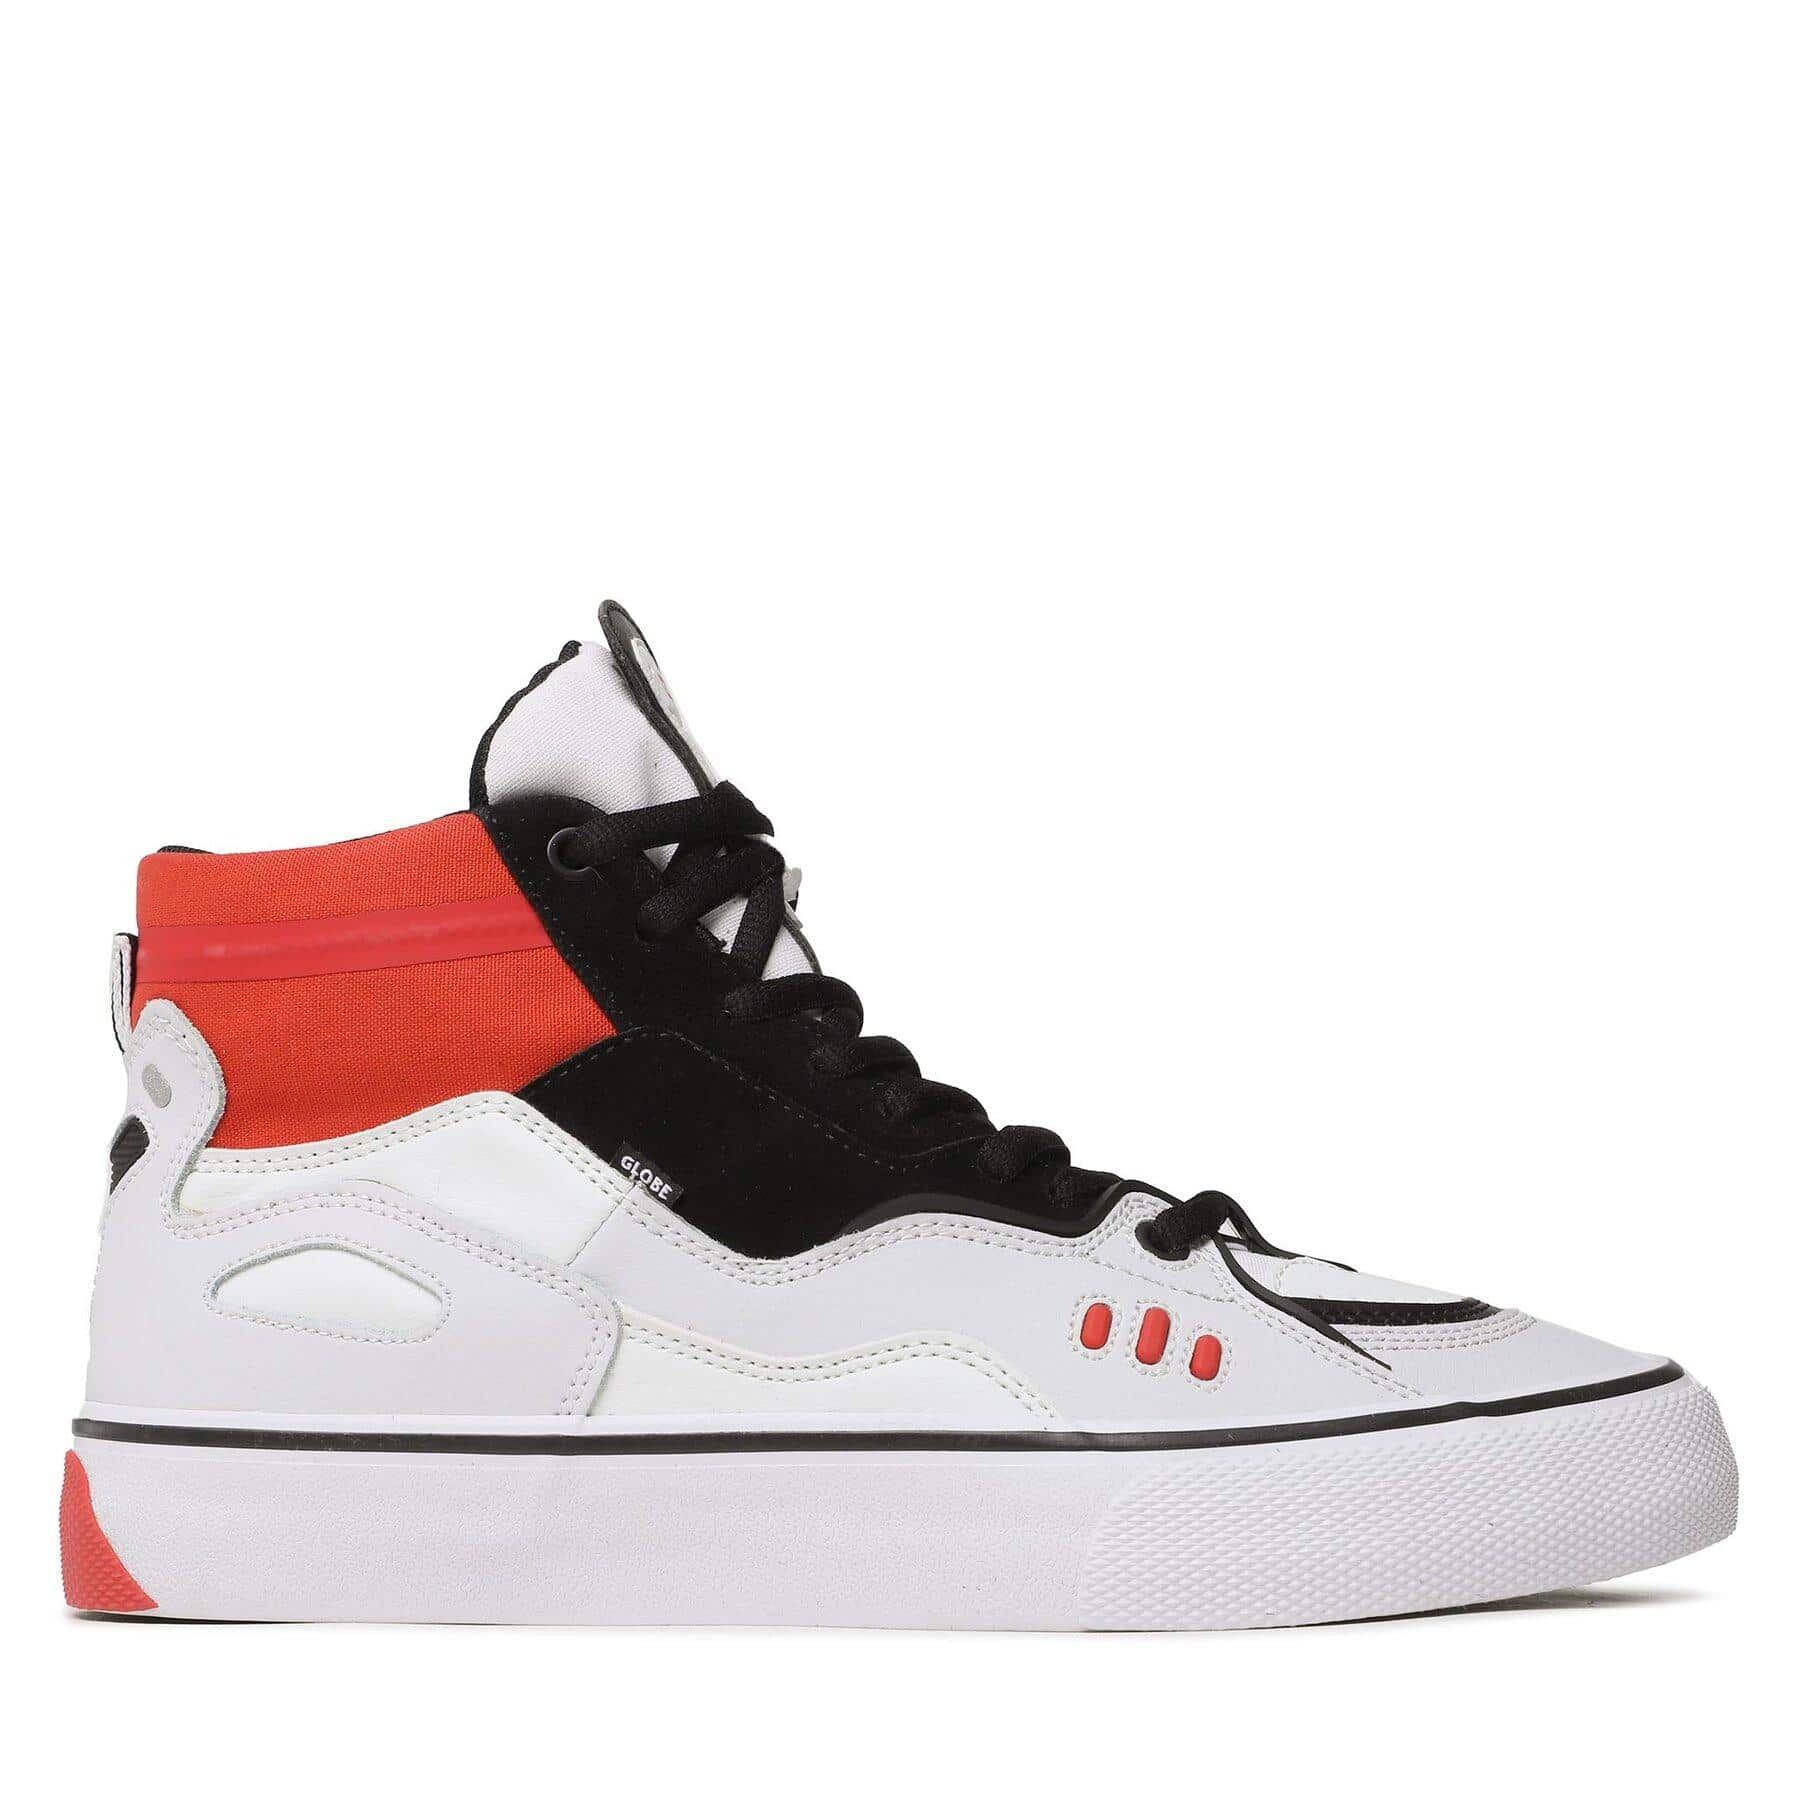 Globe Dimension Blanc White Black Red 11010 Chaussures Homme